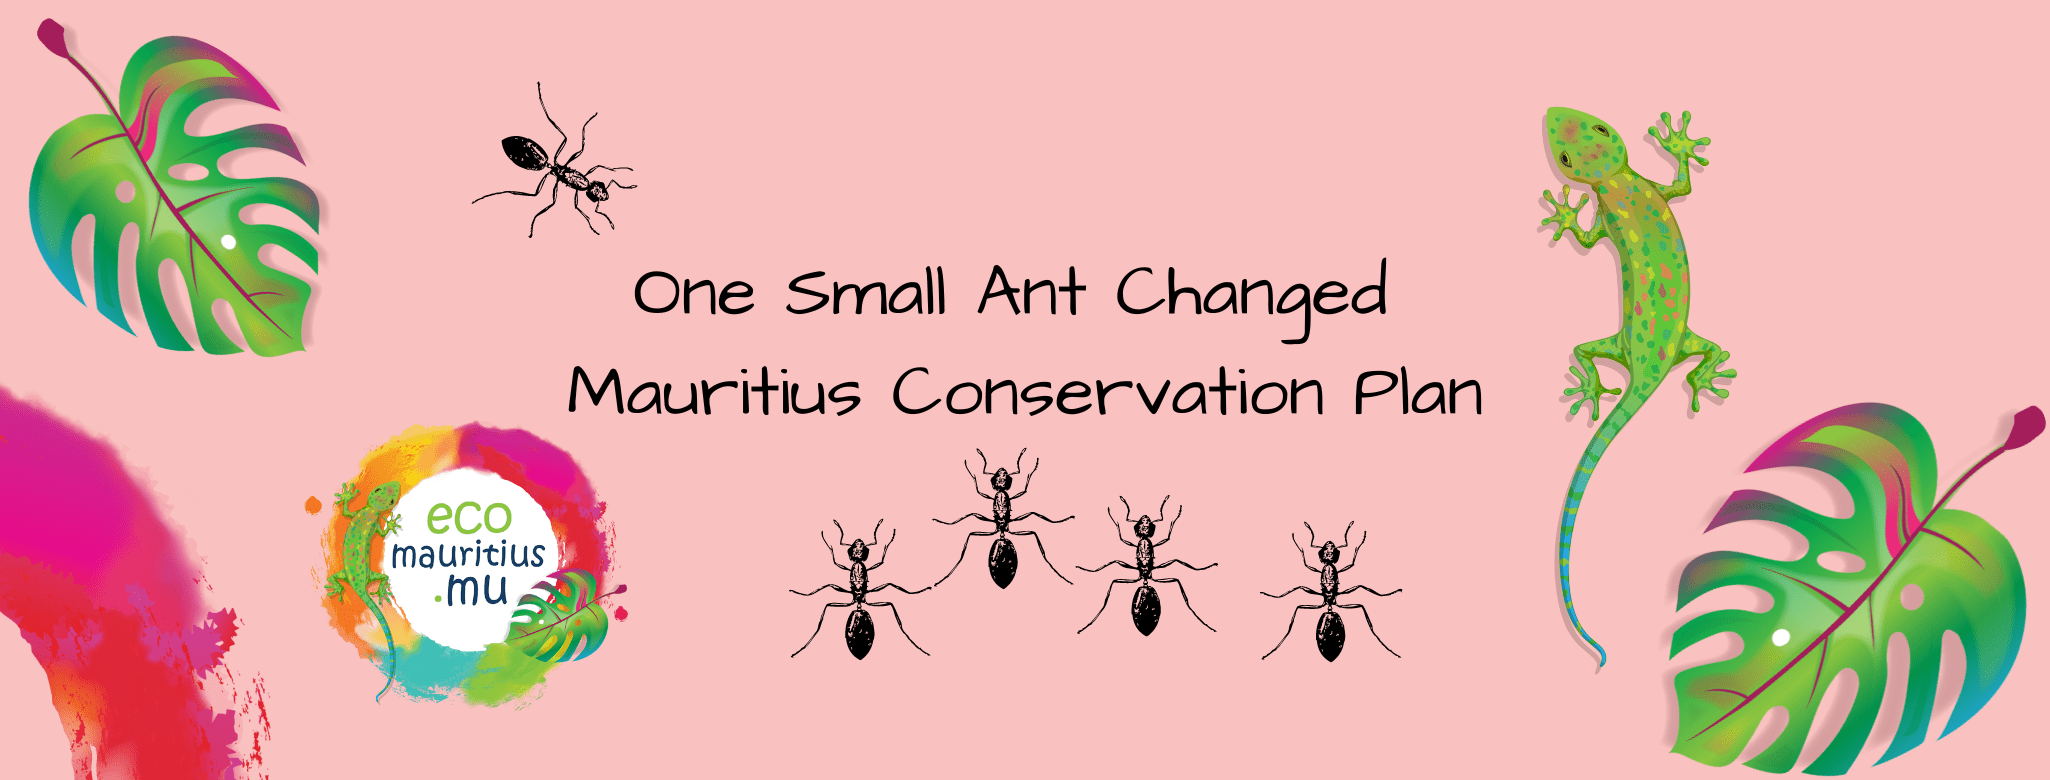 One Small Ant Changed Mauritius Conservation Plan